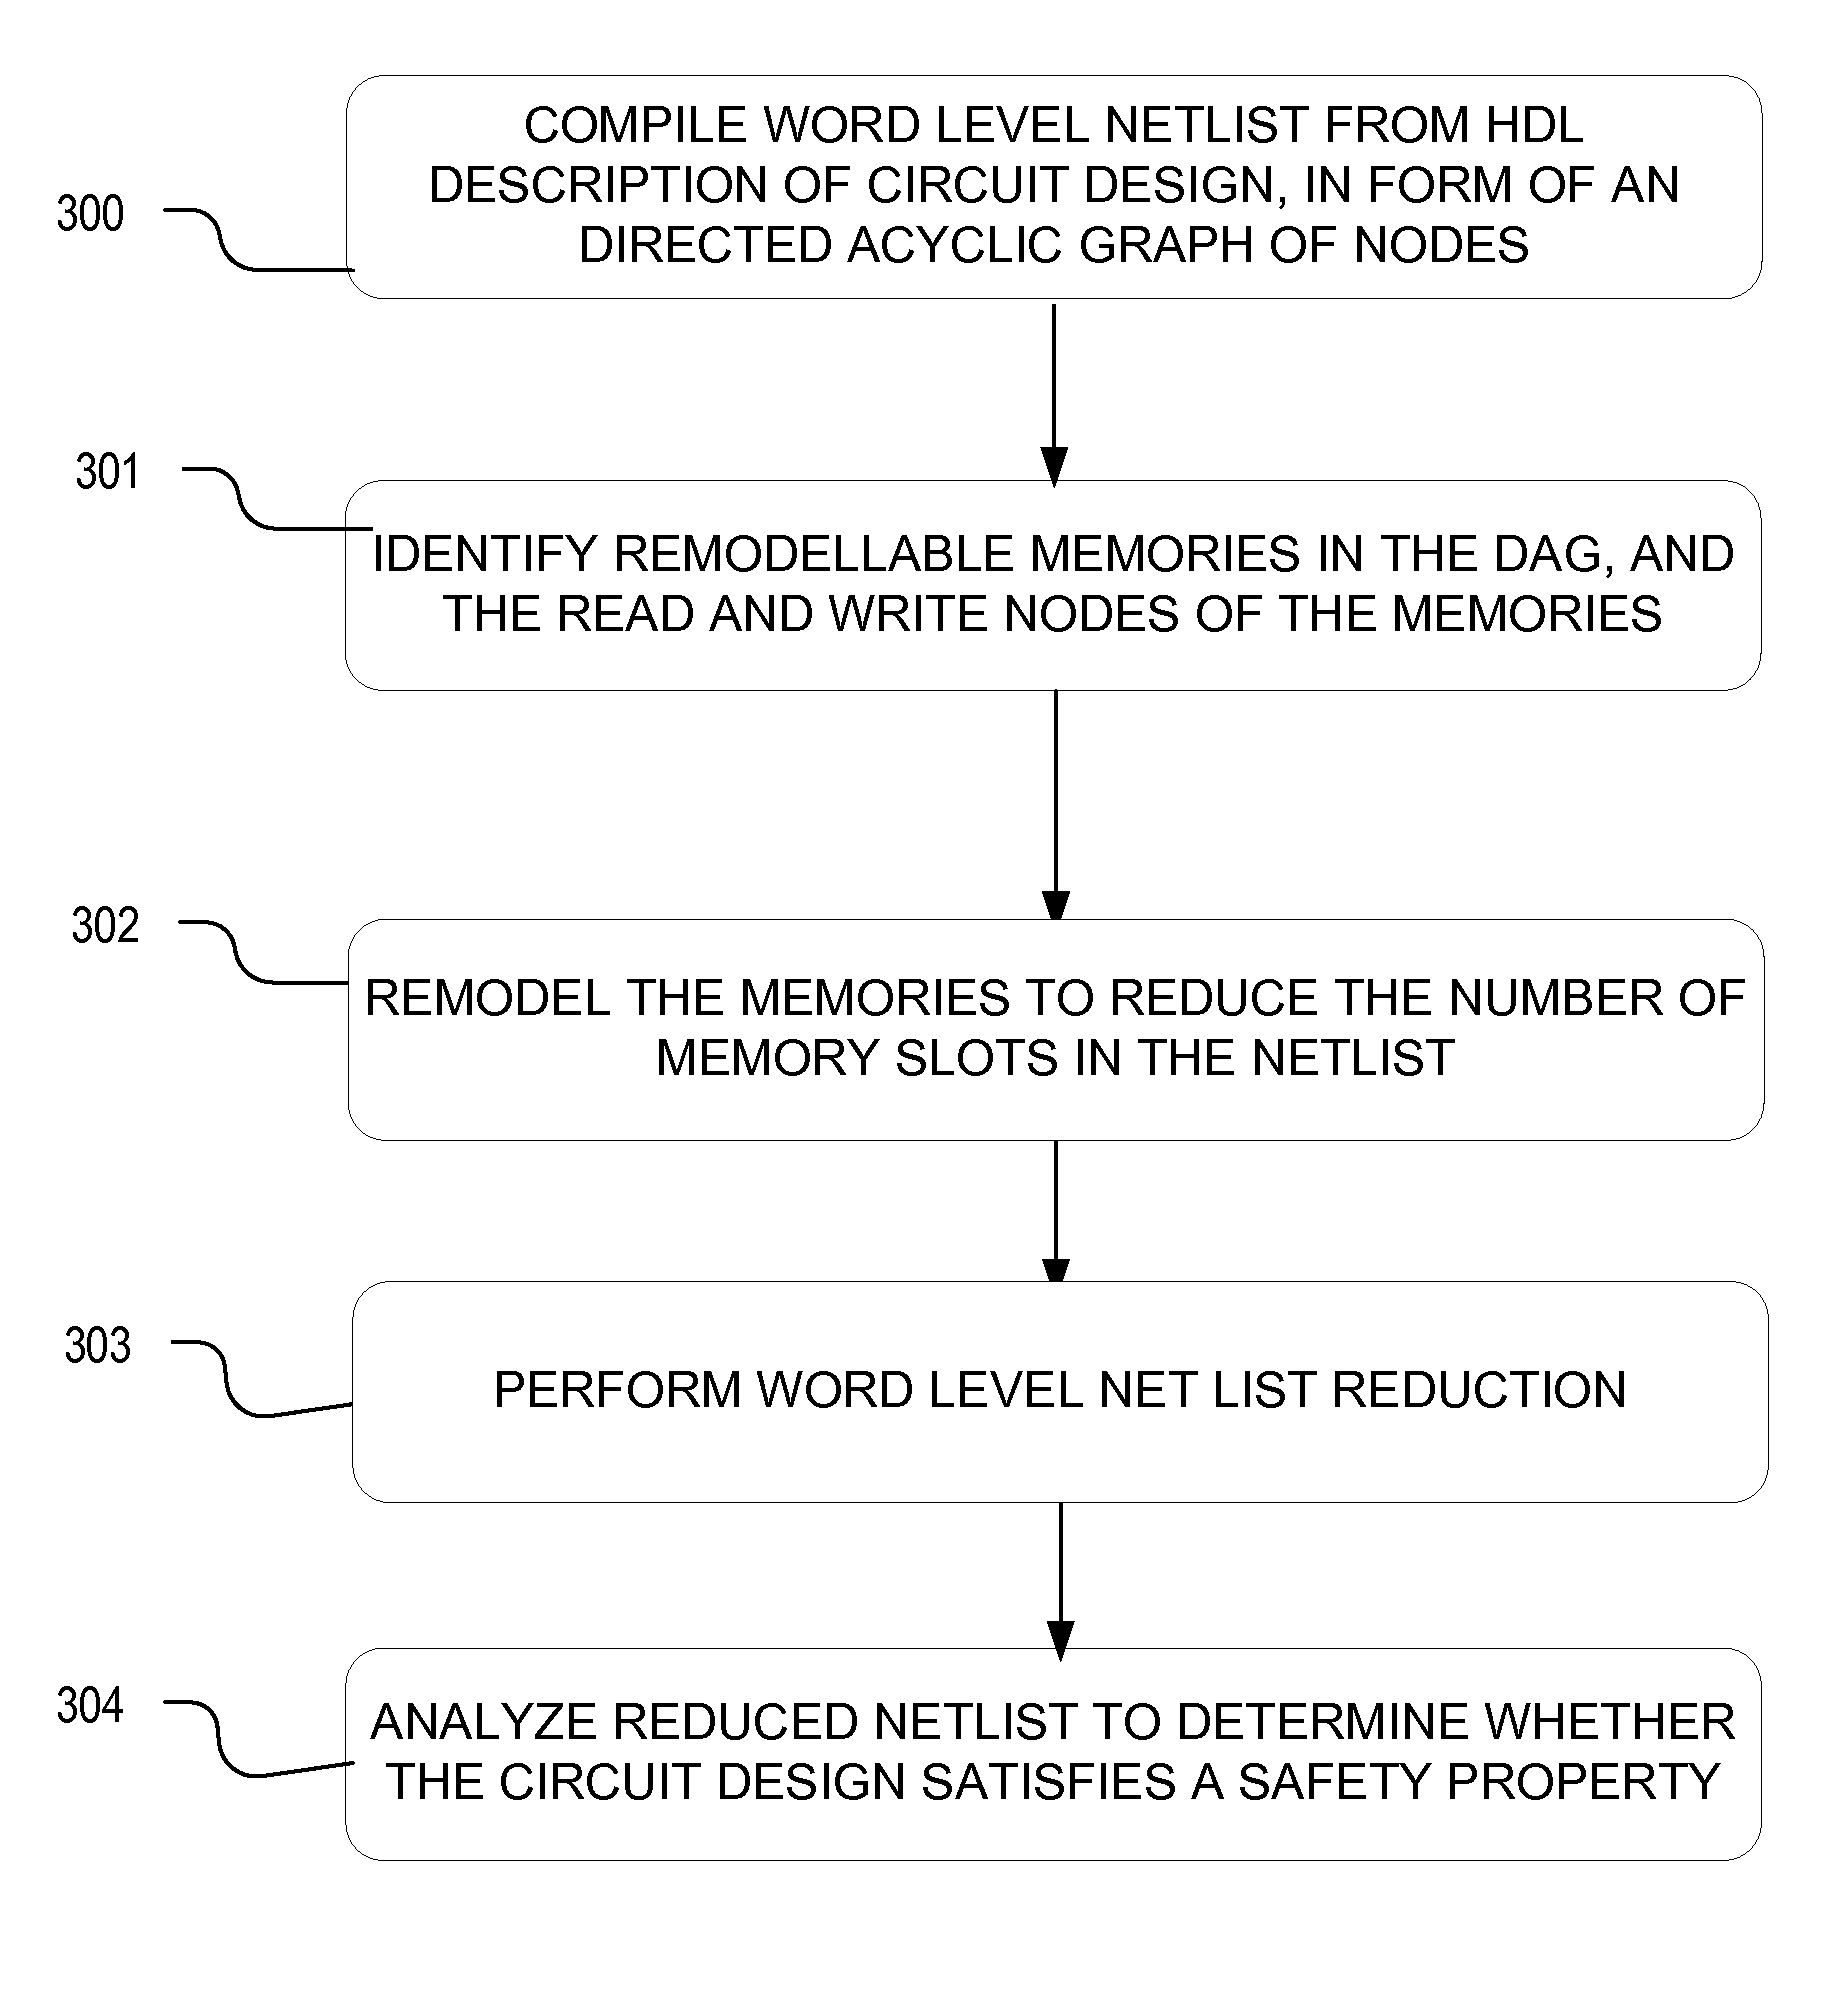 Method and apparatus for memory abstraction and for word level net list reduction and verification using same